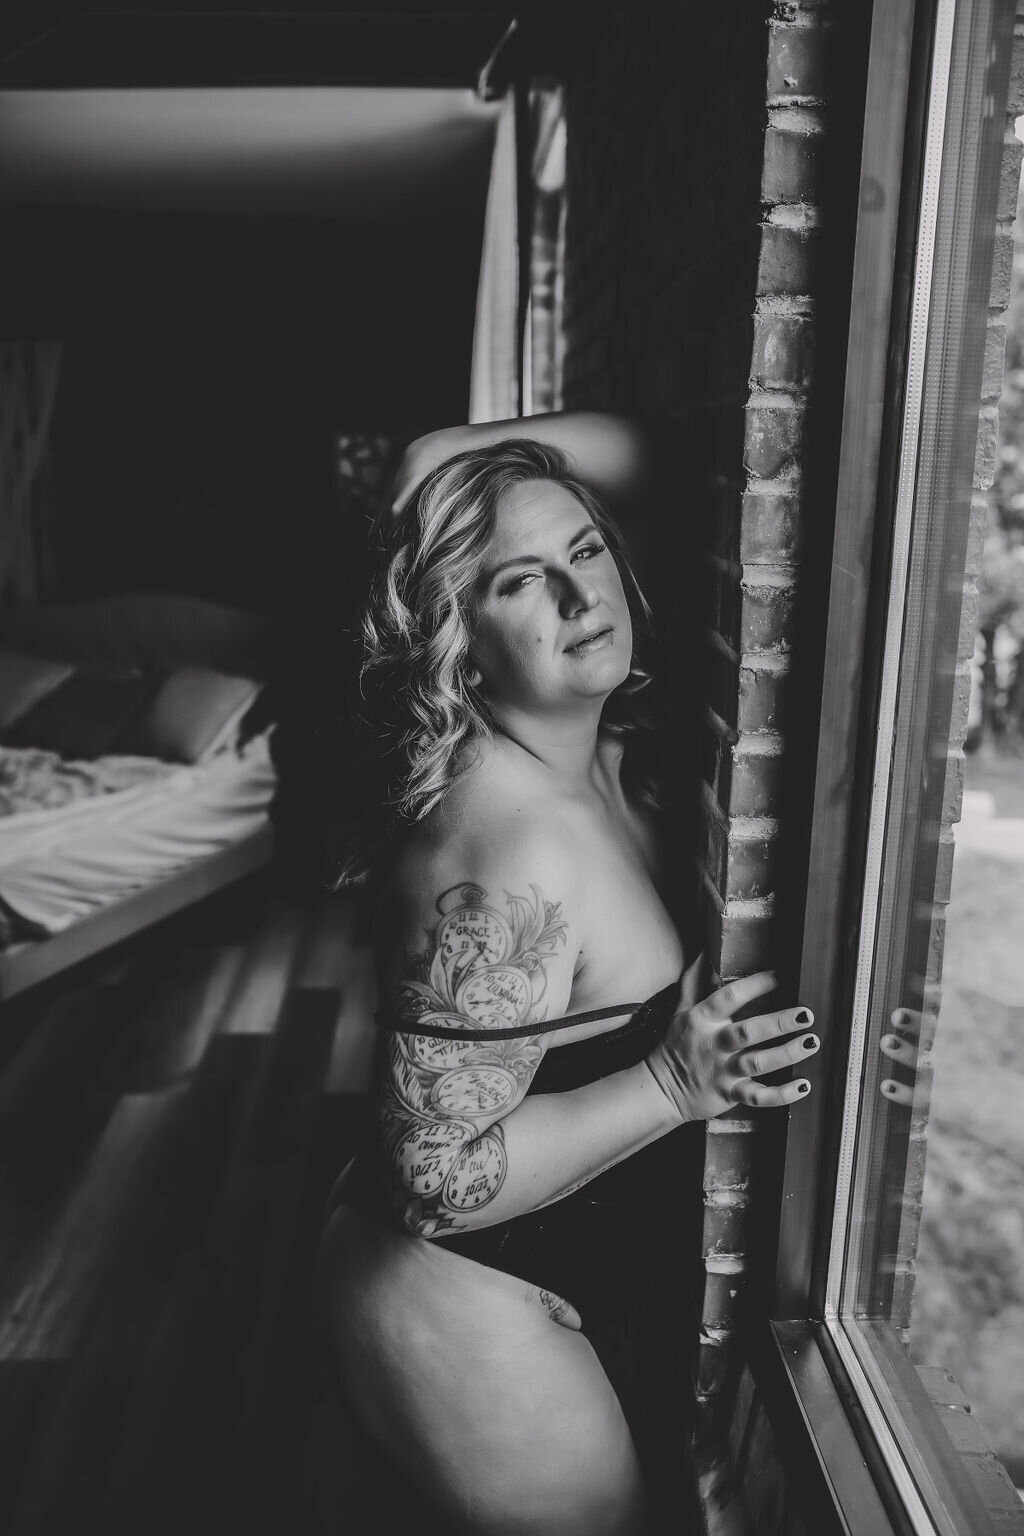 close up black and white portrait boudoir of woman in lingerie with hand in hair by window